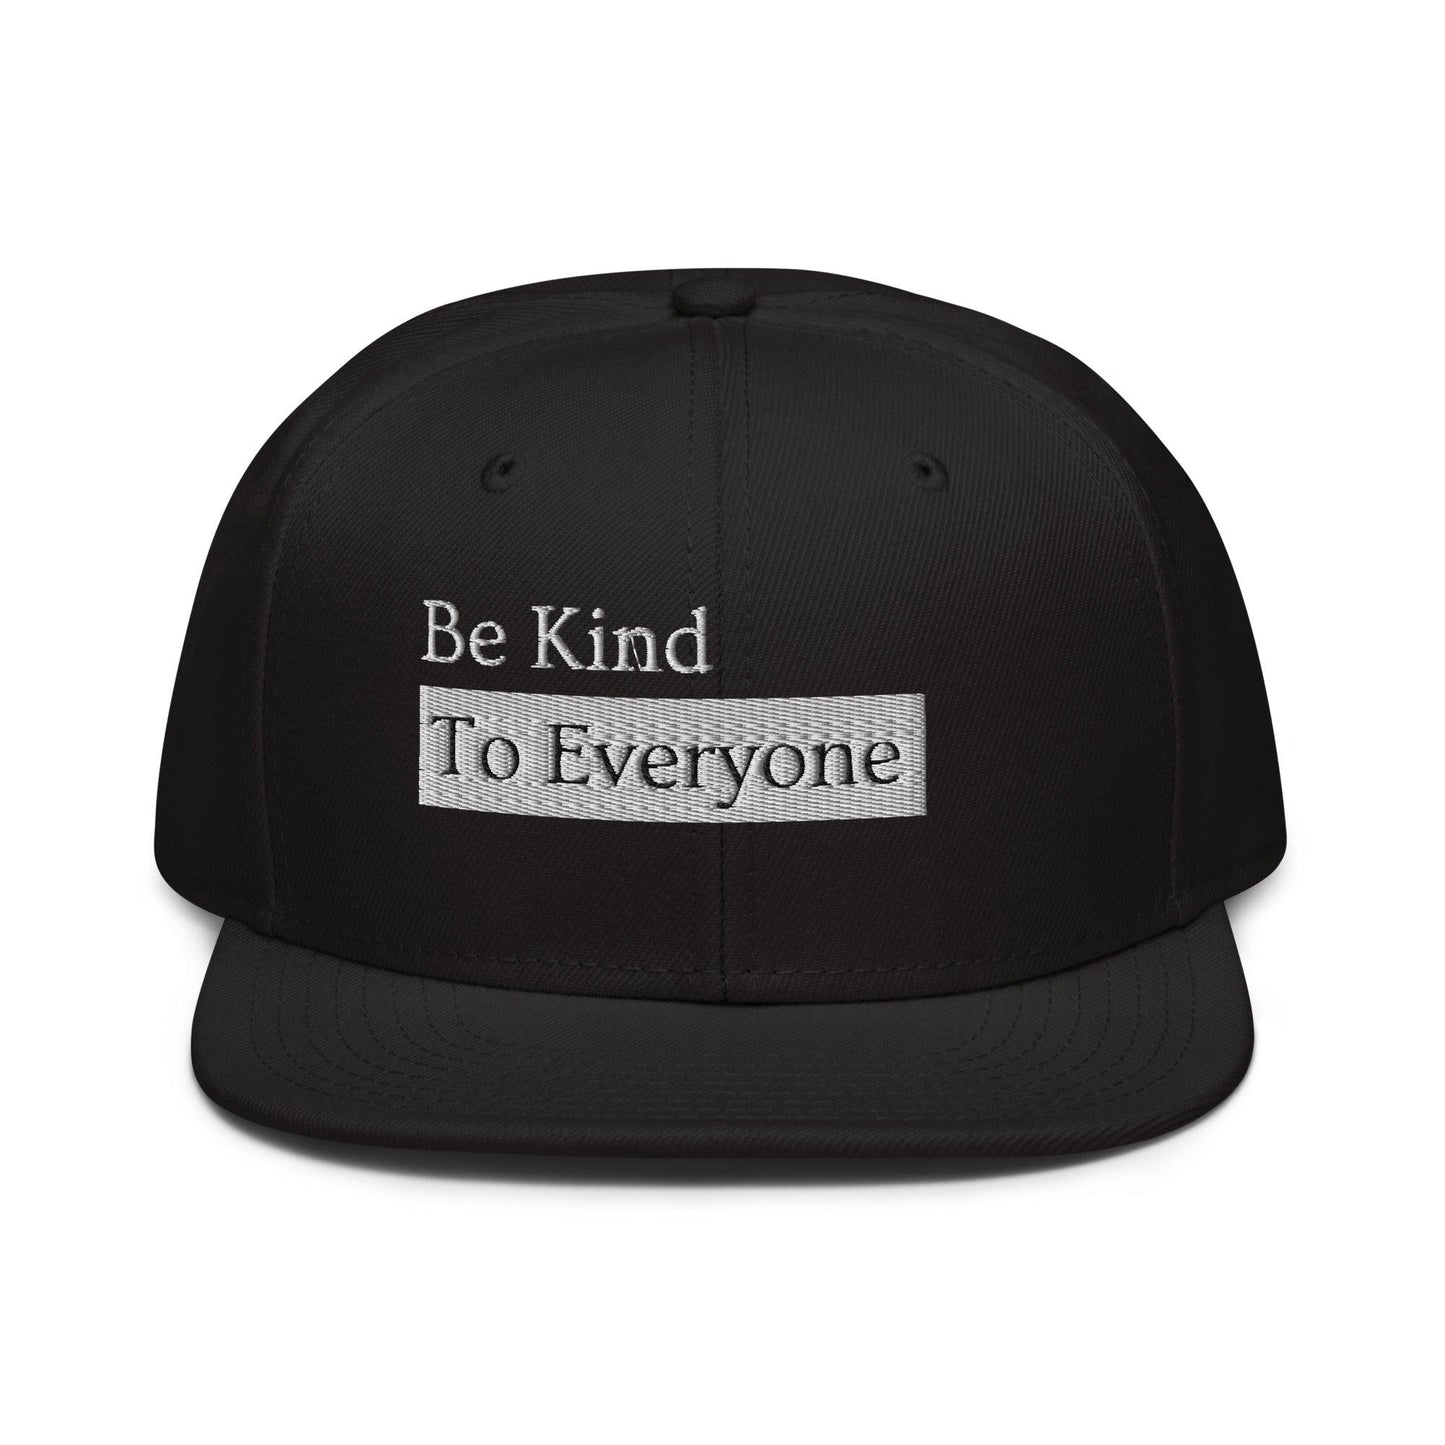 Be Kind To Everyone Hat